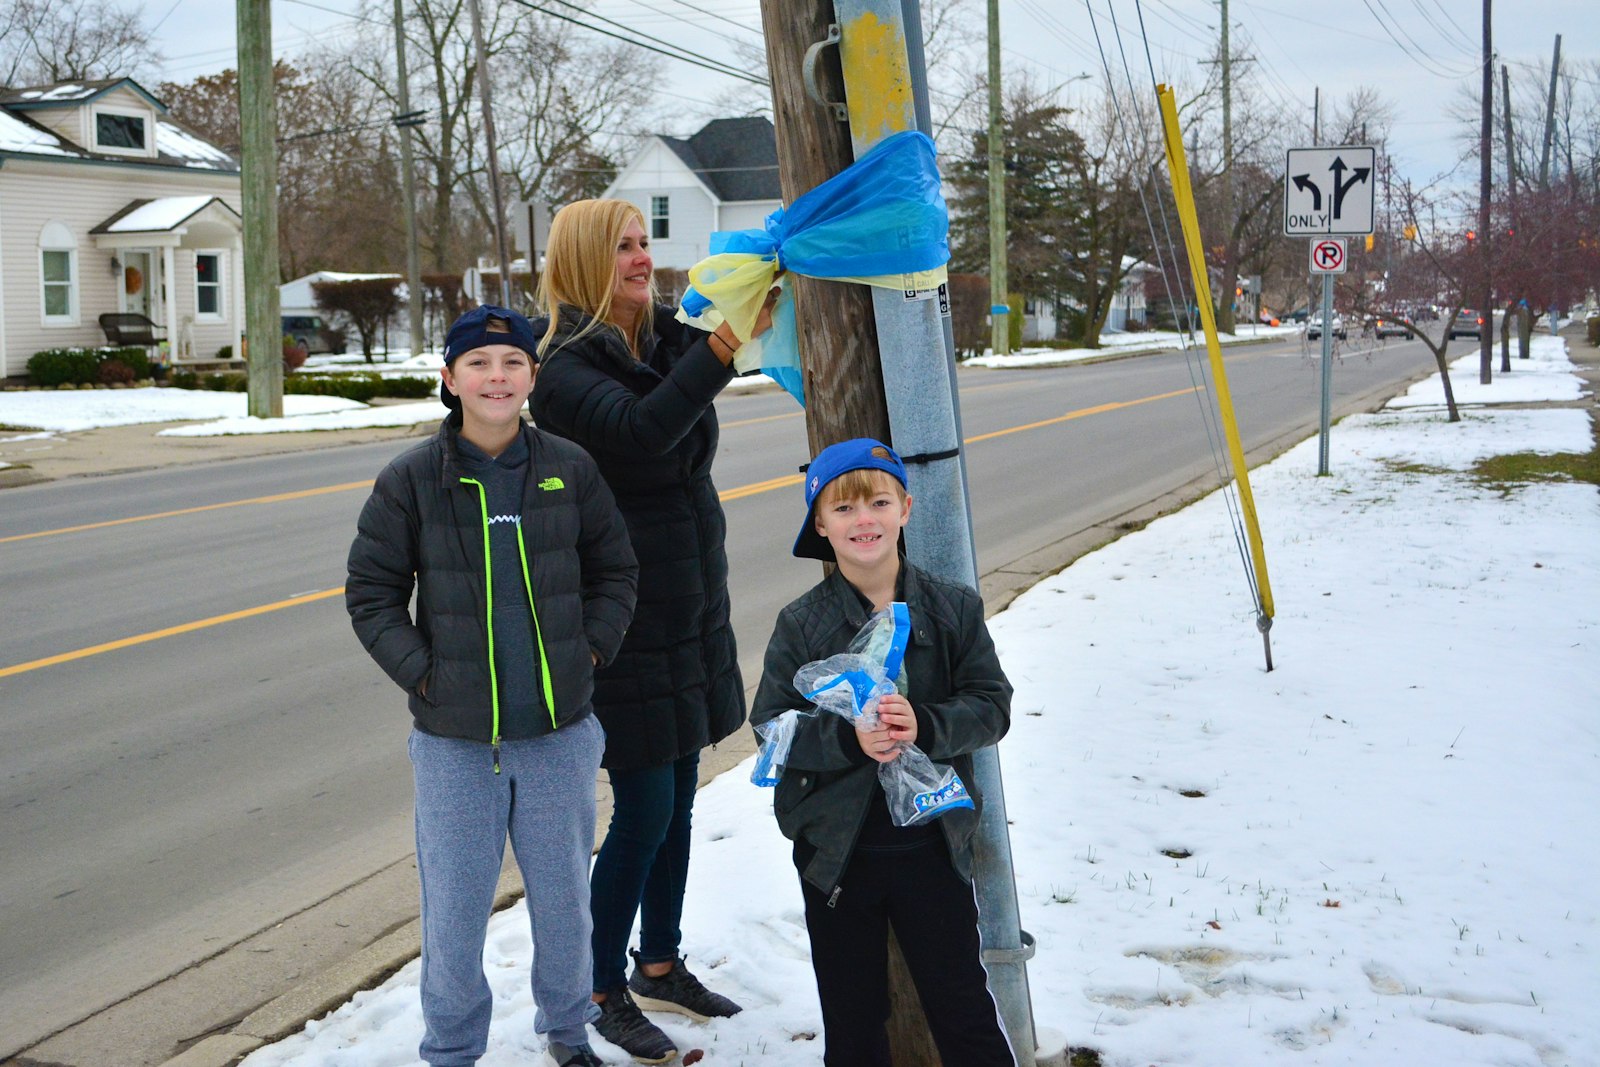 A woman and two boys, who chose not to be identified, tie blue and gold ribbons to telephone poles along Glaspie Street near Oxford High School on Dec. 1. Dozens of volunteers hung banners, ribbons and signs throughout the town.